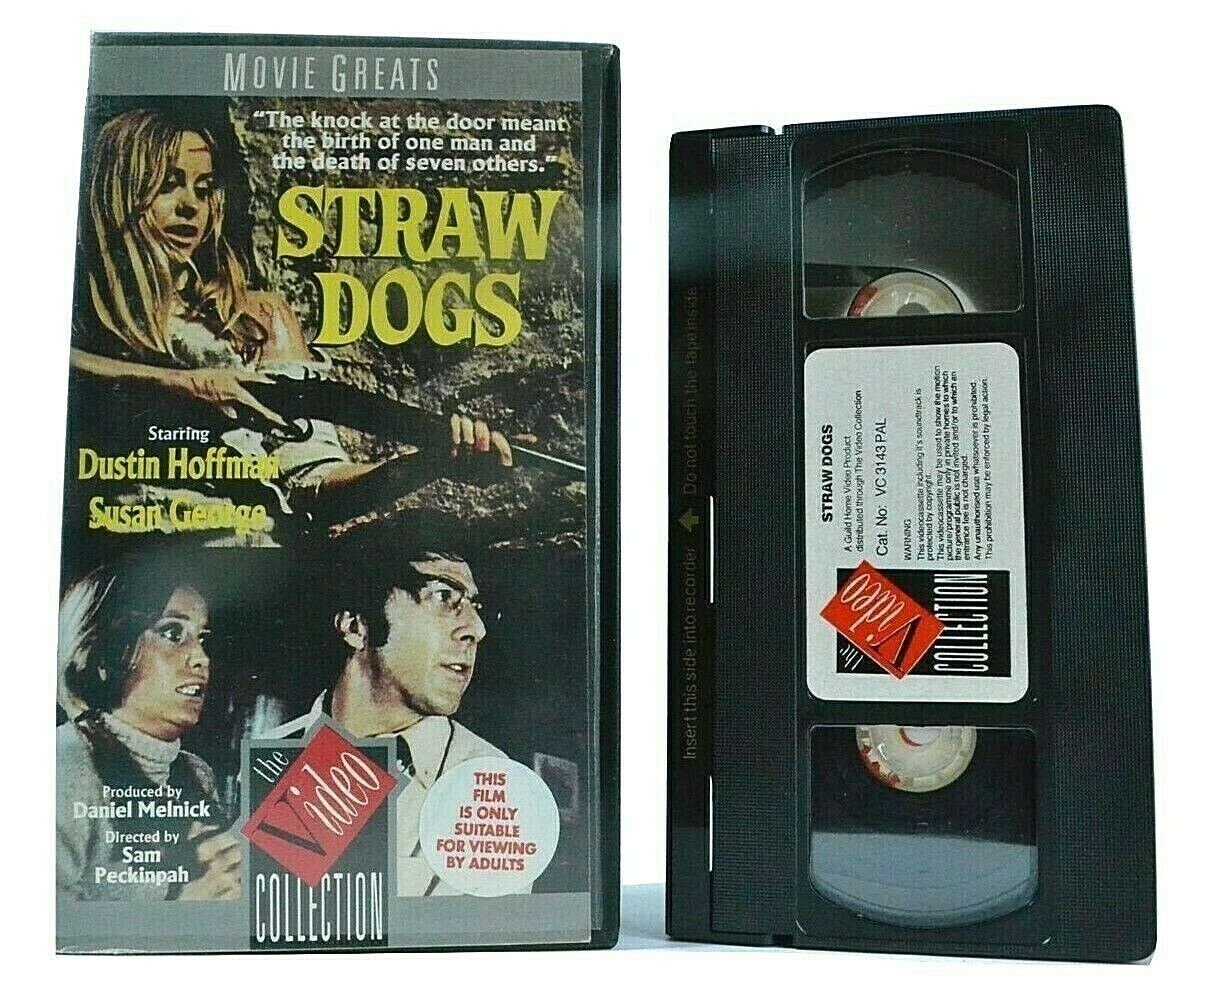 Straw Dogs; [Movie Greats]: Crime Thriller - Dustin Hoffman / Susan George - VHS-